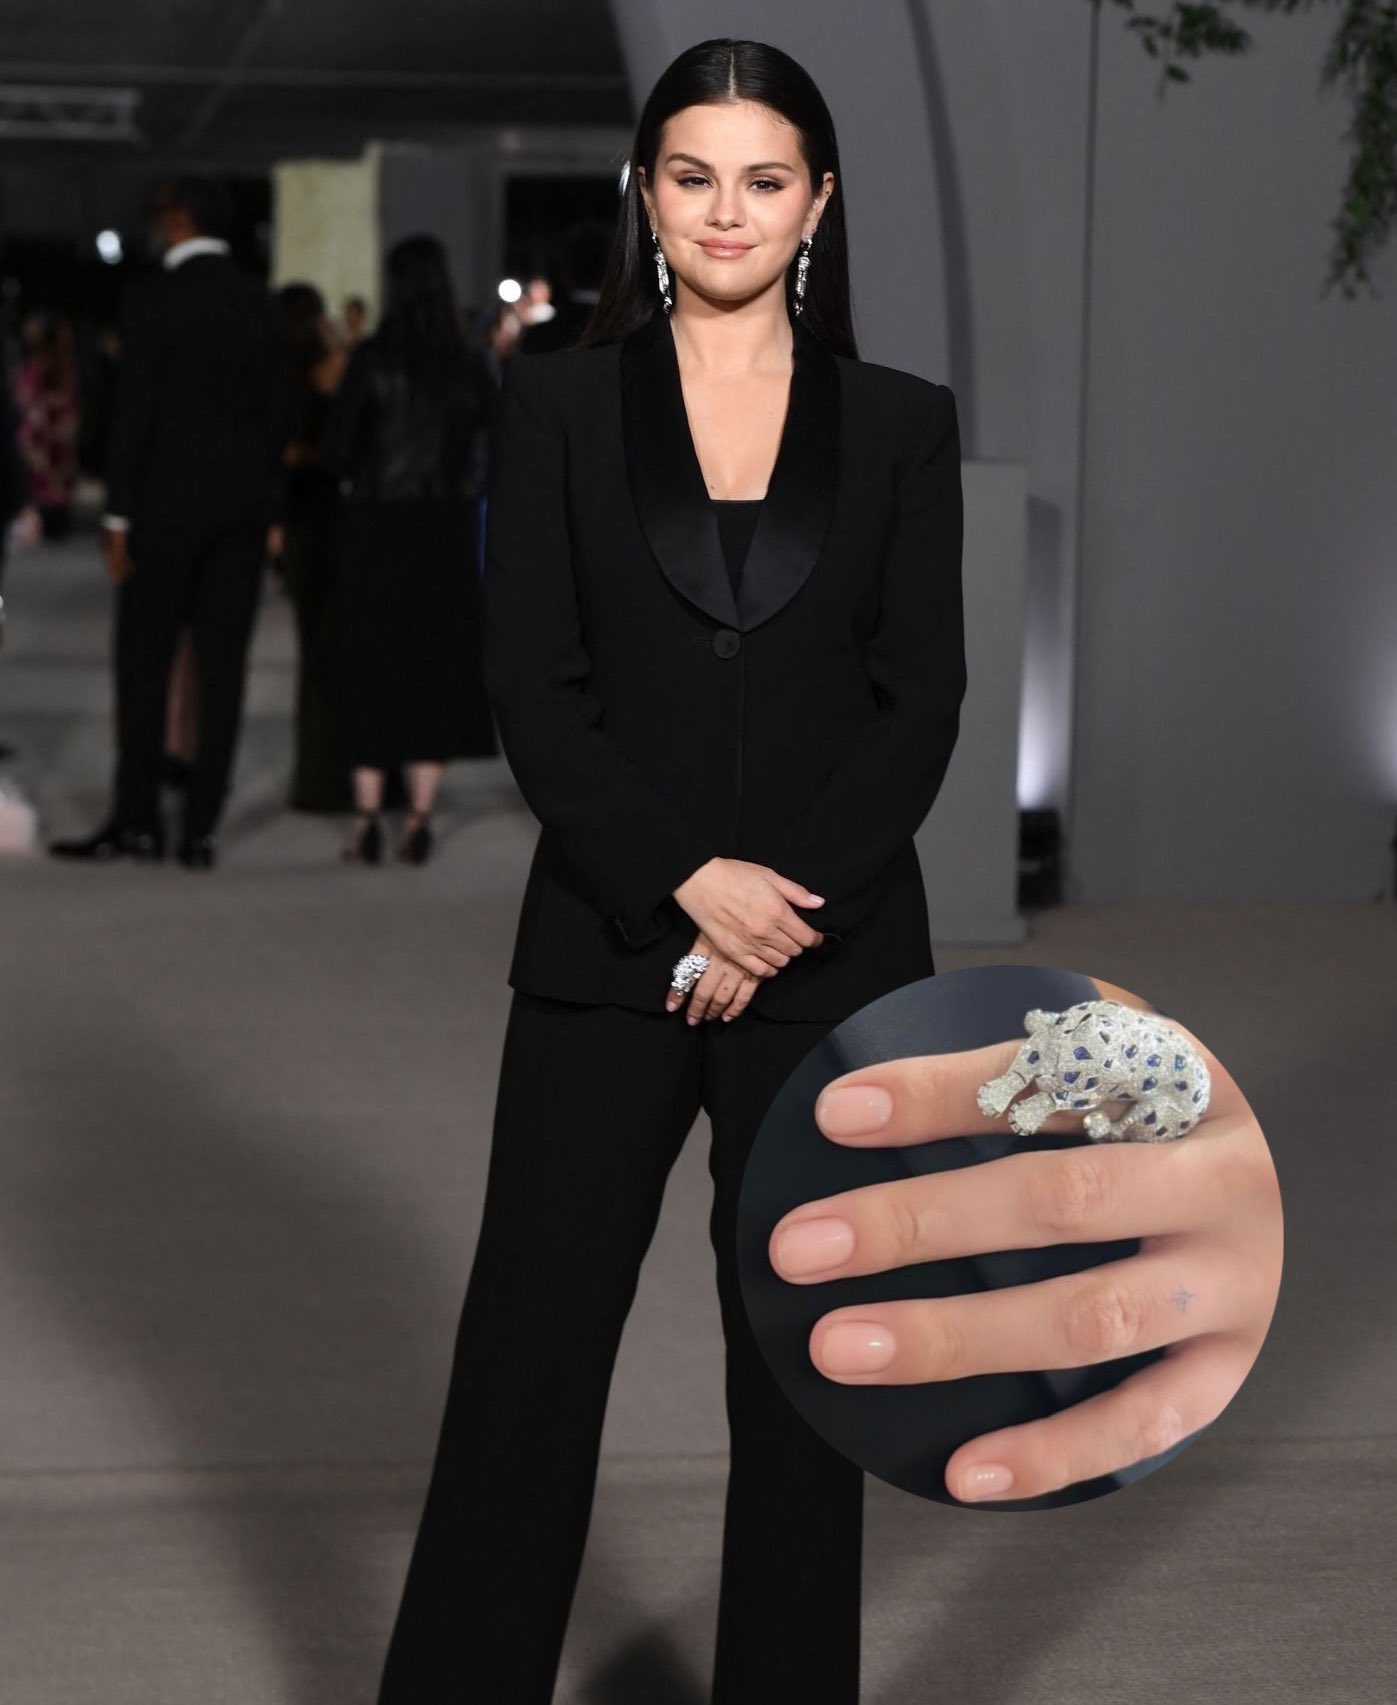 Actress/singer Selena Gomez, ring detail, attends City Of Hope's 2015...  News Photo - Getty Images